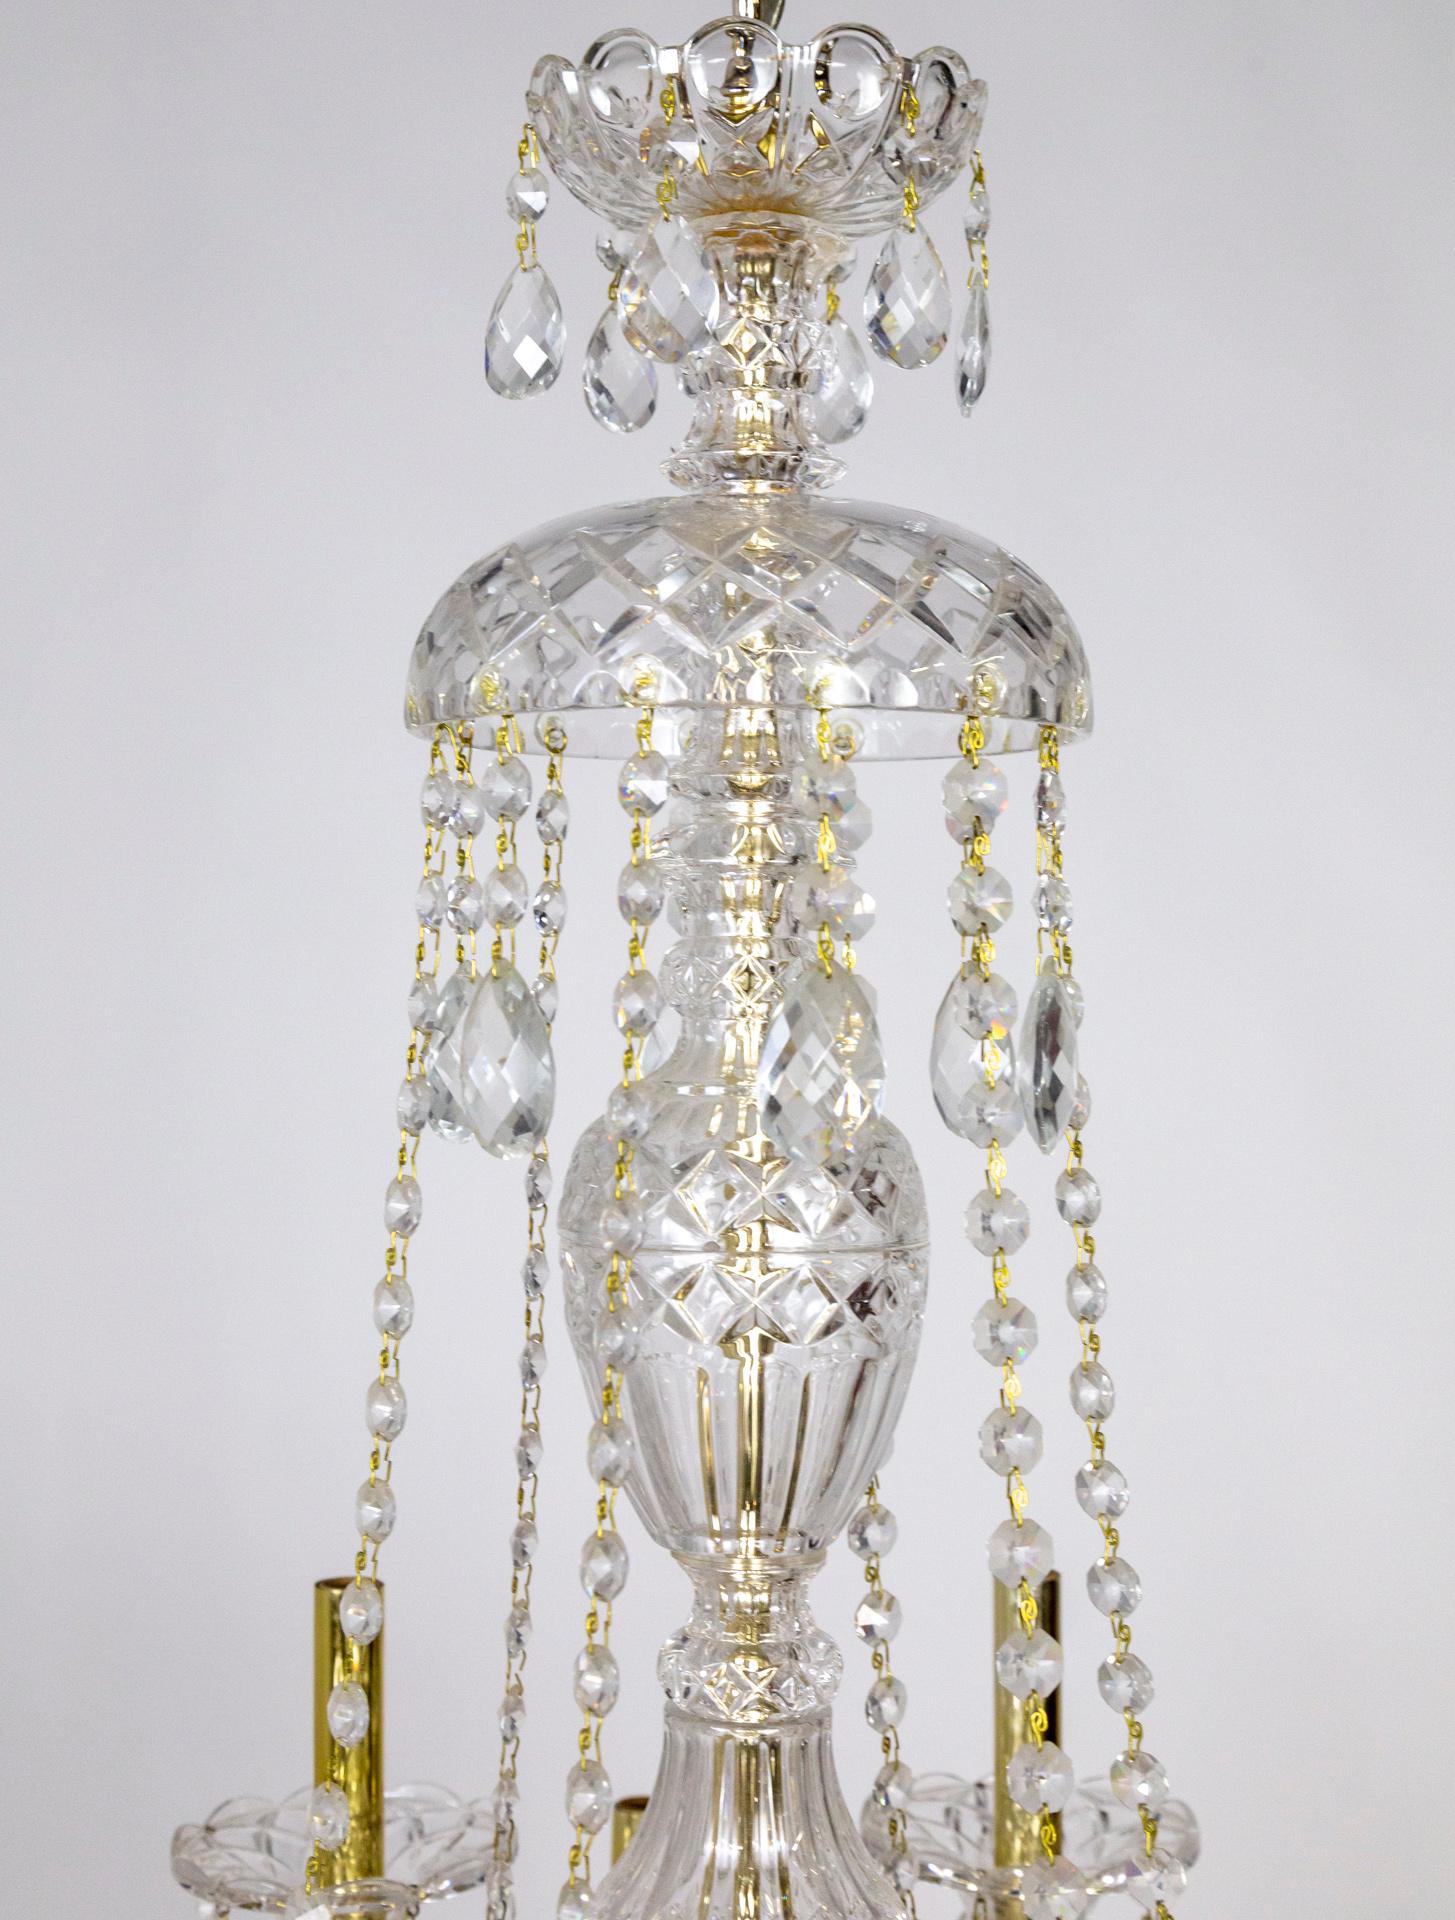 A 12-arm, 2-tier chandelier made of Bohemian molded glass that creates intriguing texture. With crystal beaded garlands and reflective, gold toned candle covers. 1970s. Measures: 45” height x 30” diameter.